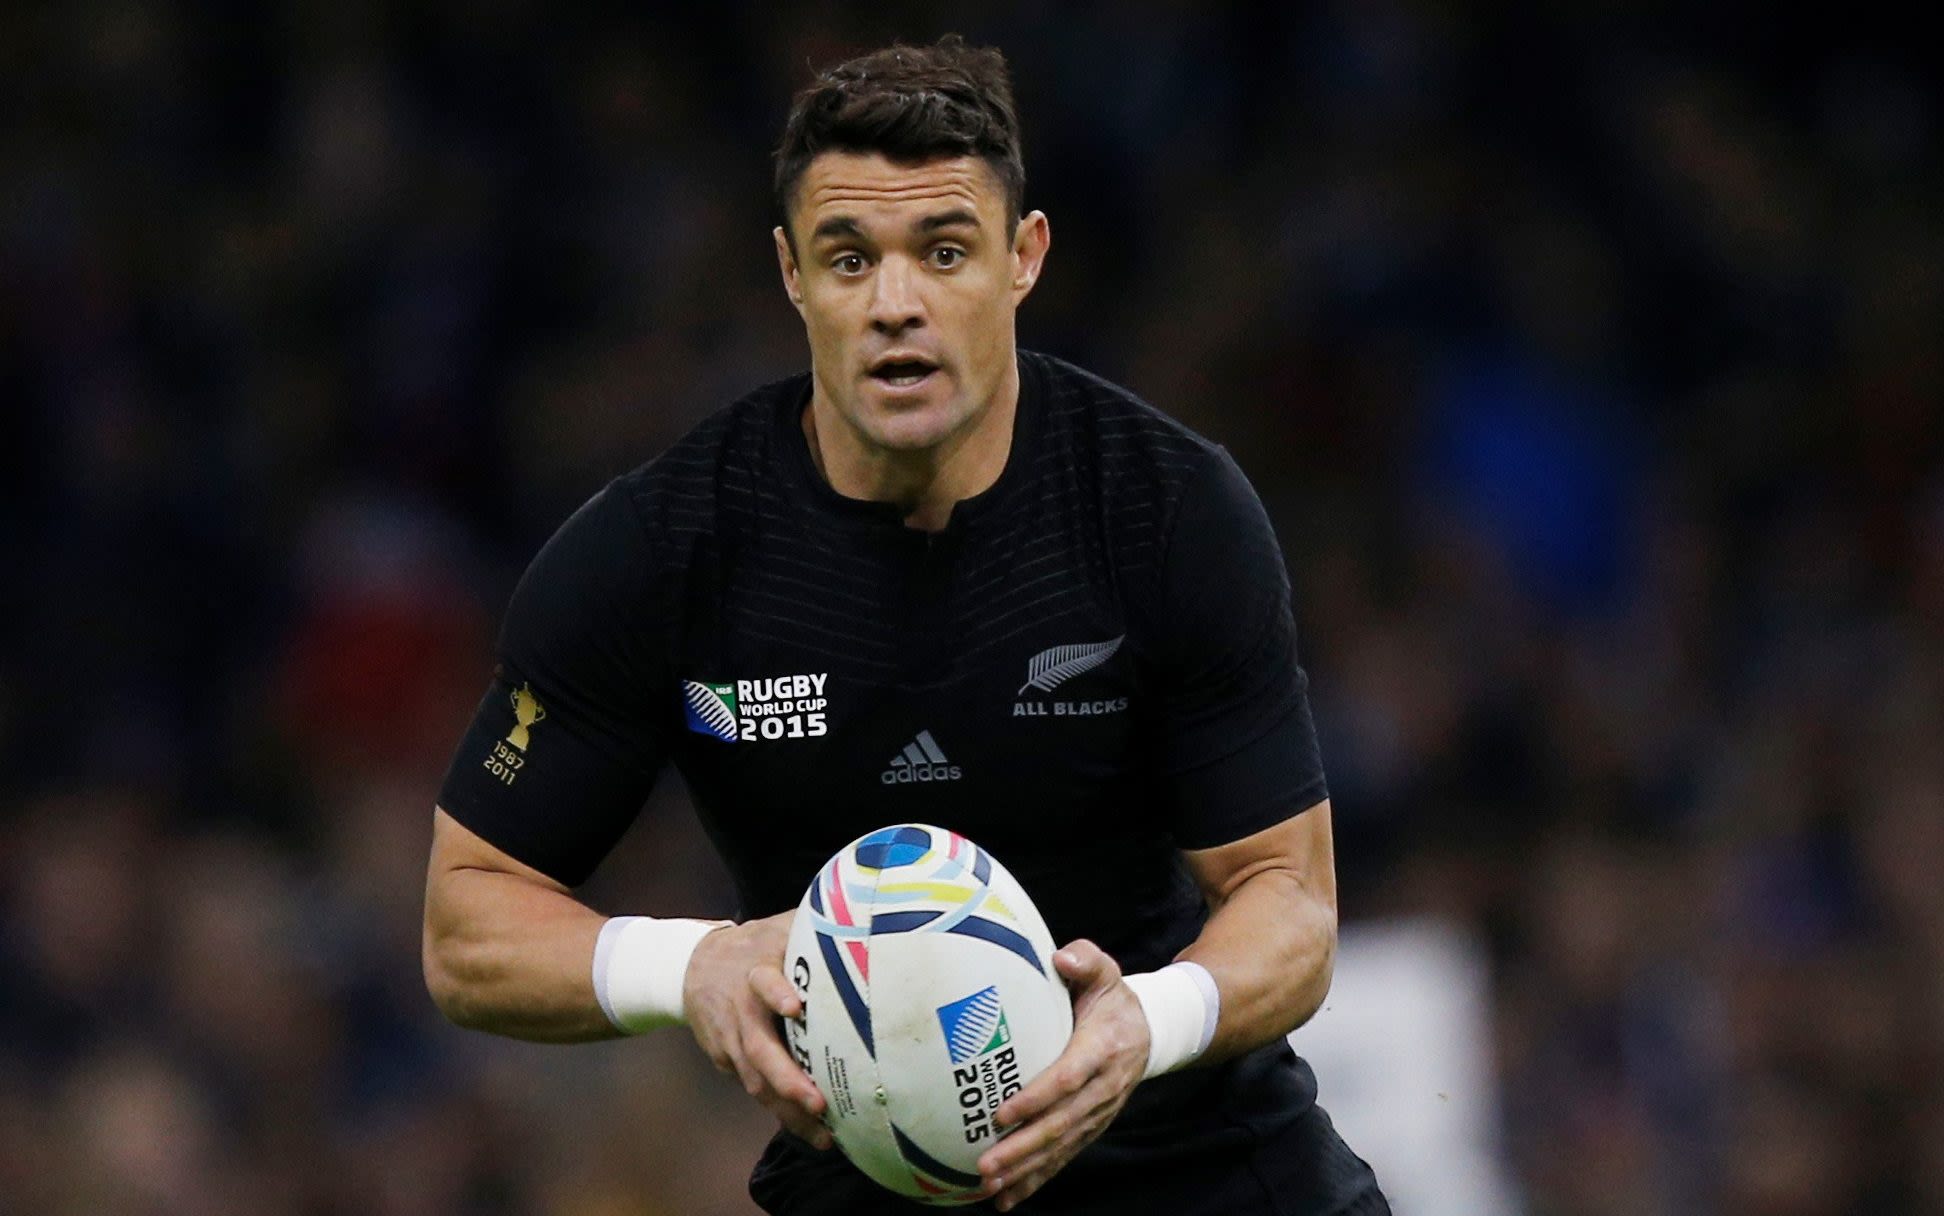 Dan Carter: I struggled with lack of identity and purpose when I stopped playing